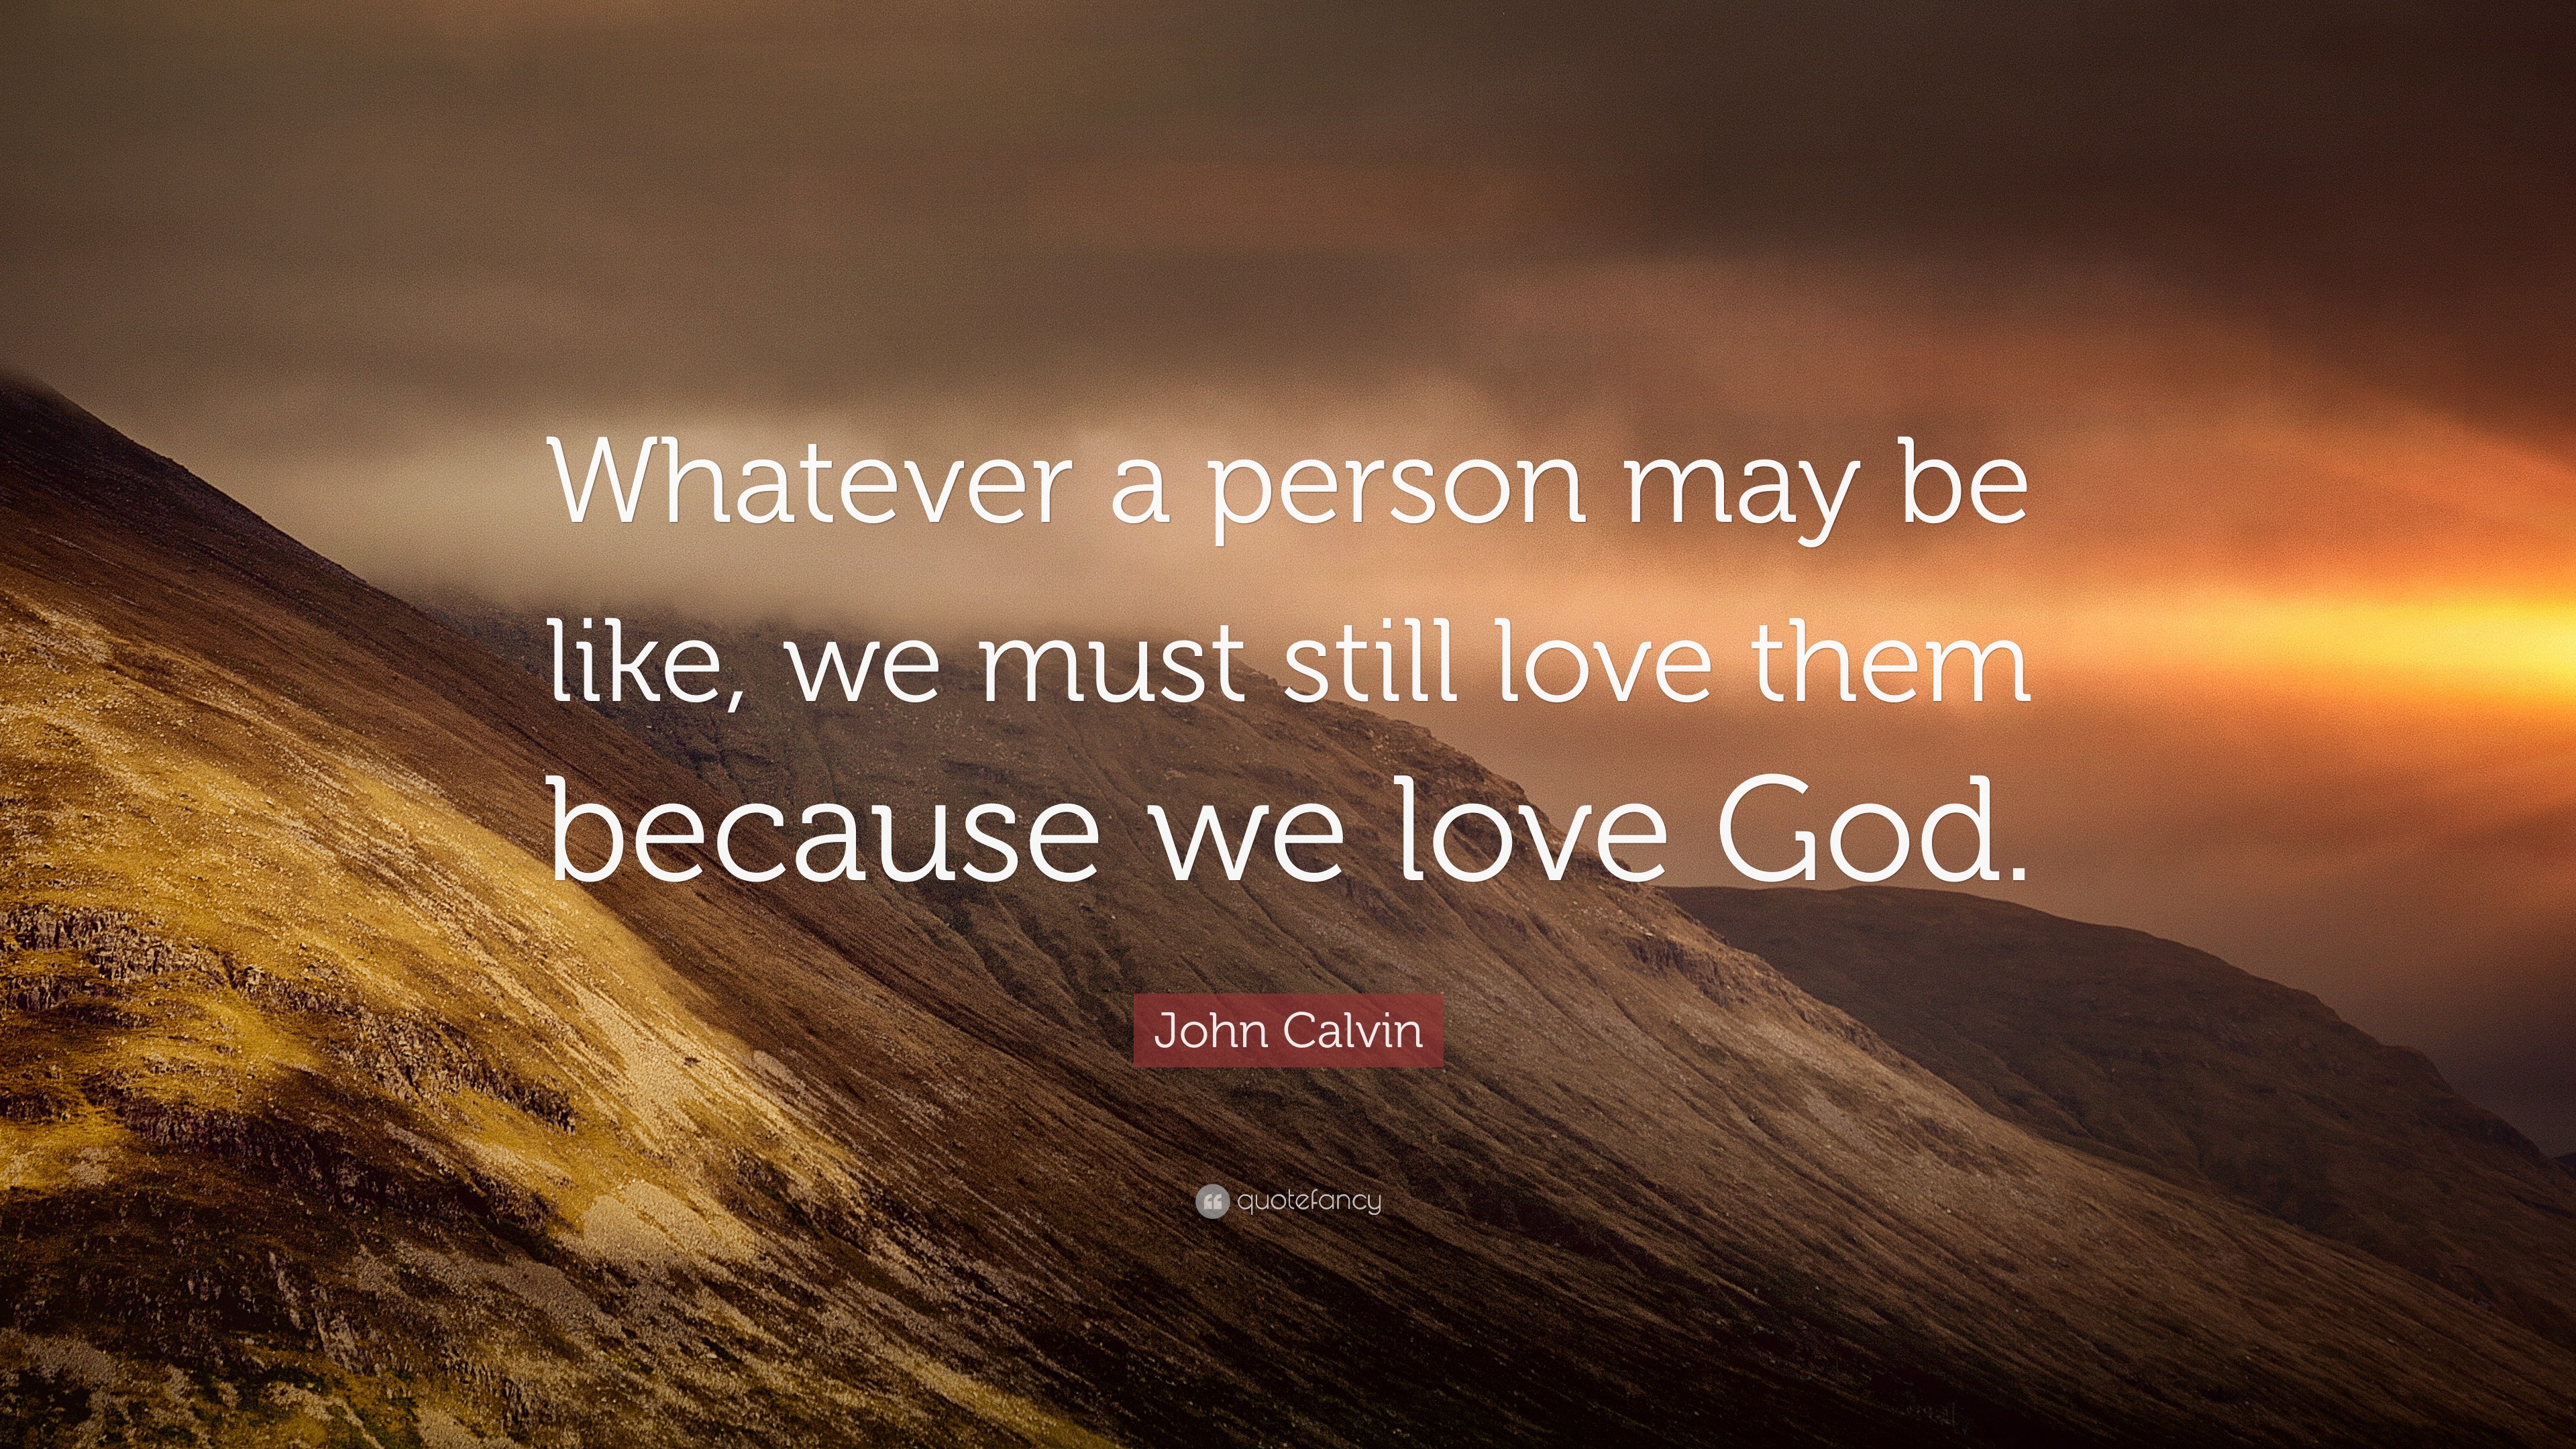 John Calvin Quote: “Whatever a person may be like, we must still love them  because we